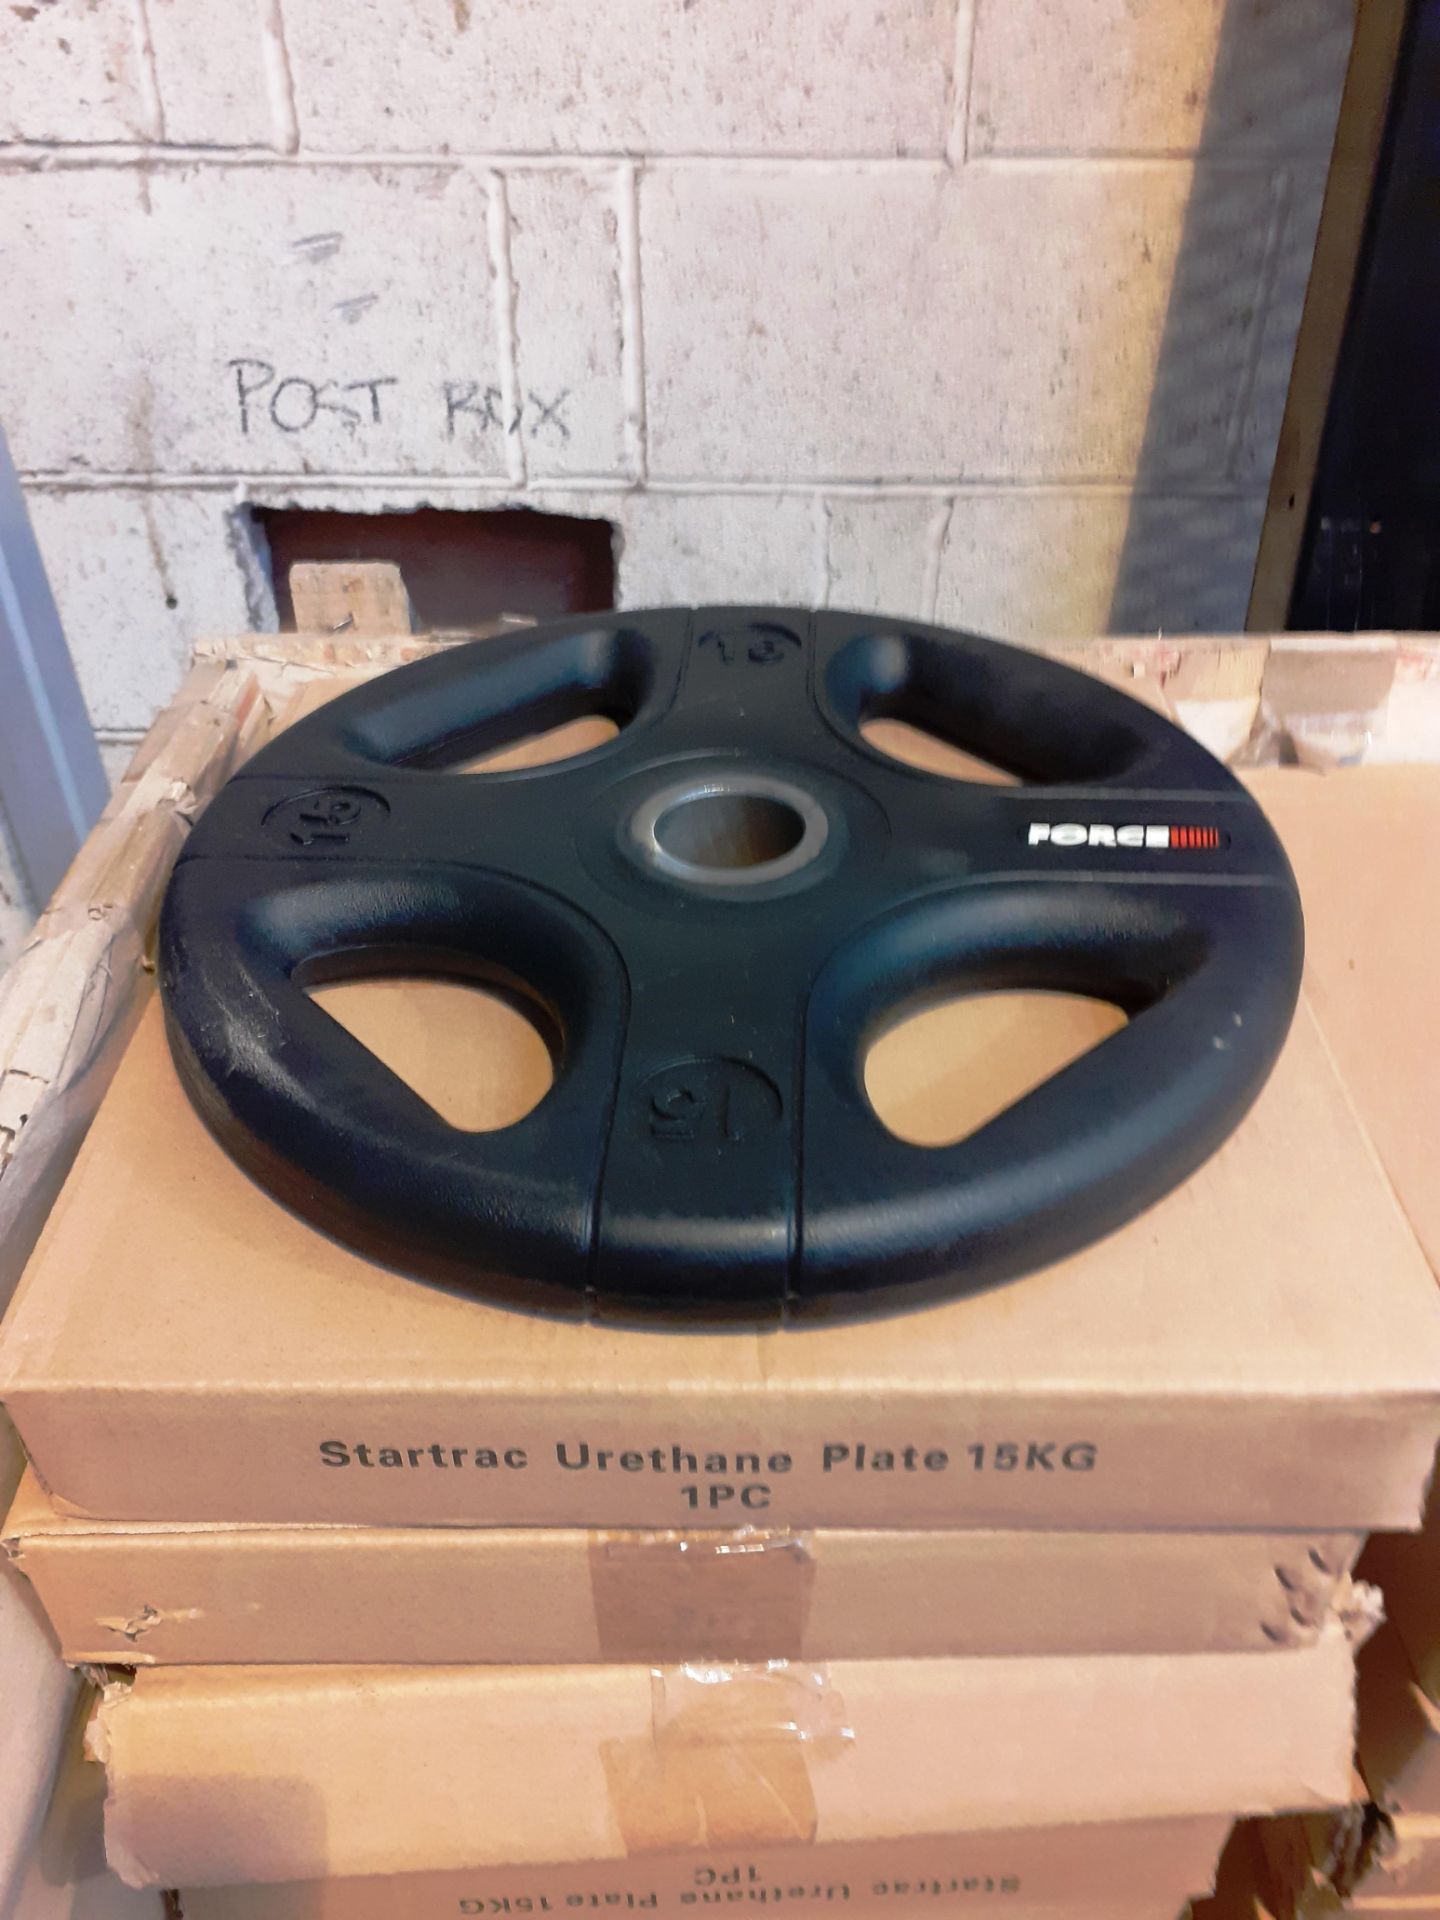 Olympic Flat plate Weights. Set of 2x 15KG - Image 2 of 2